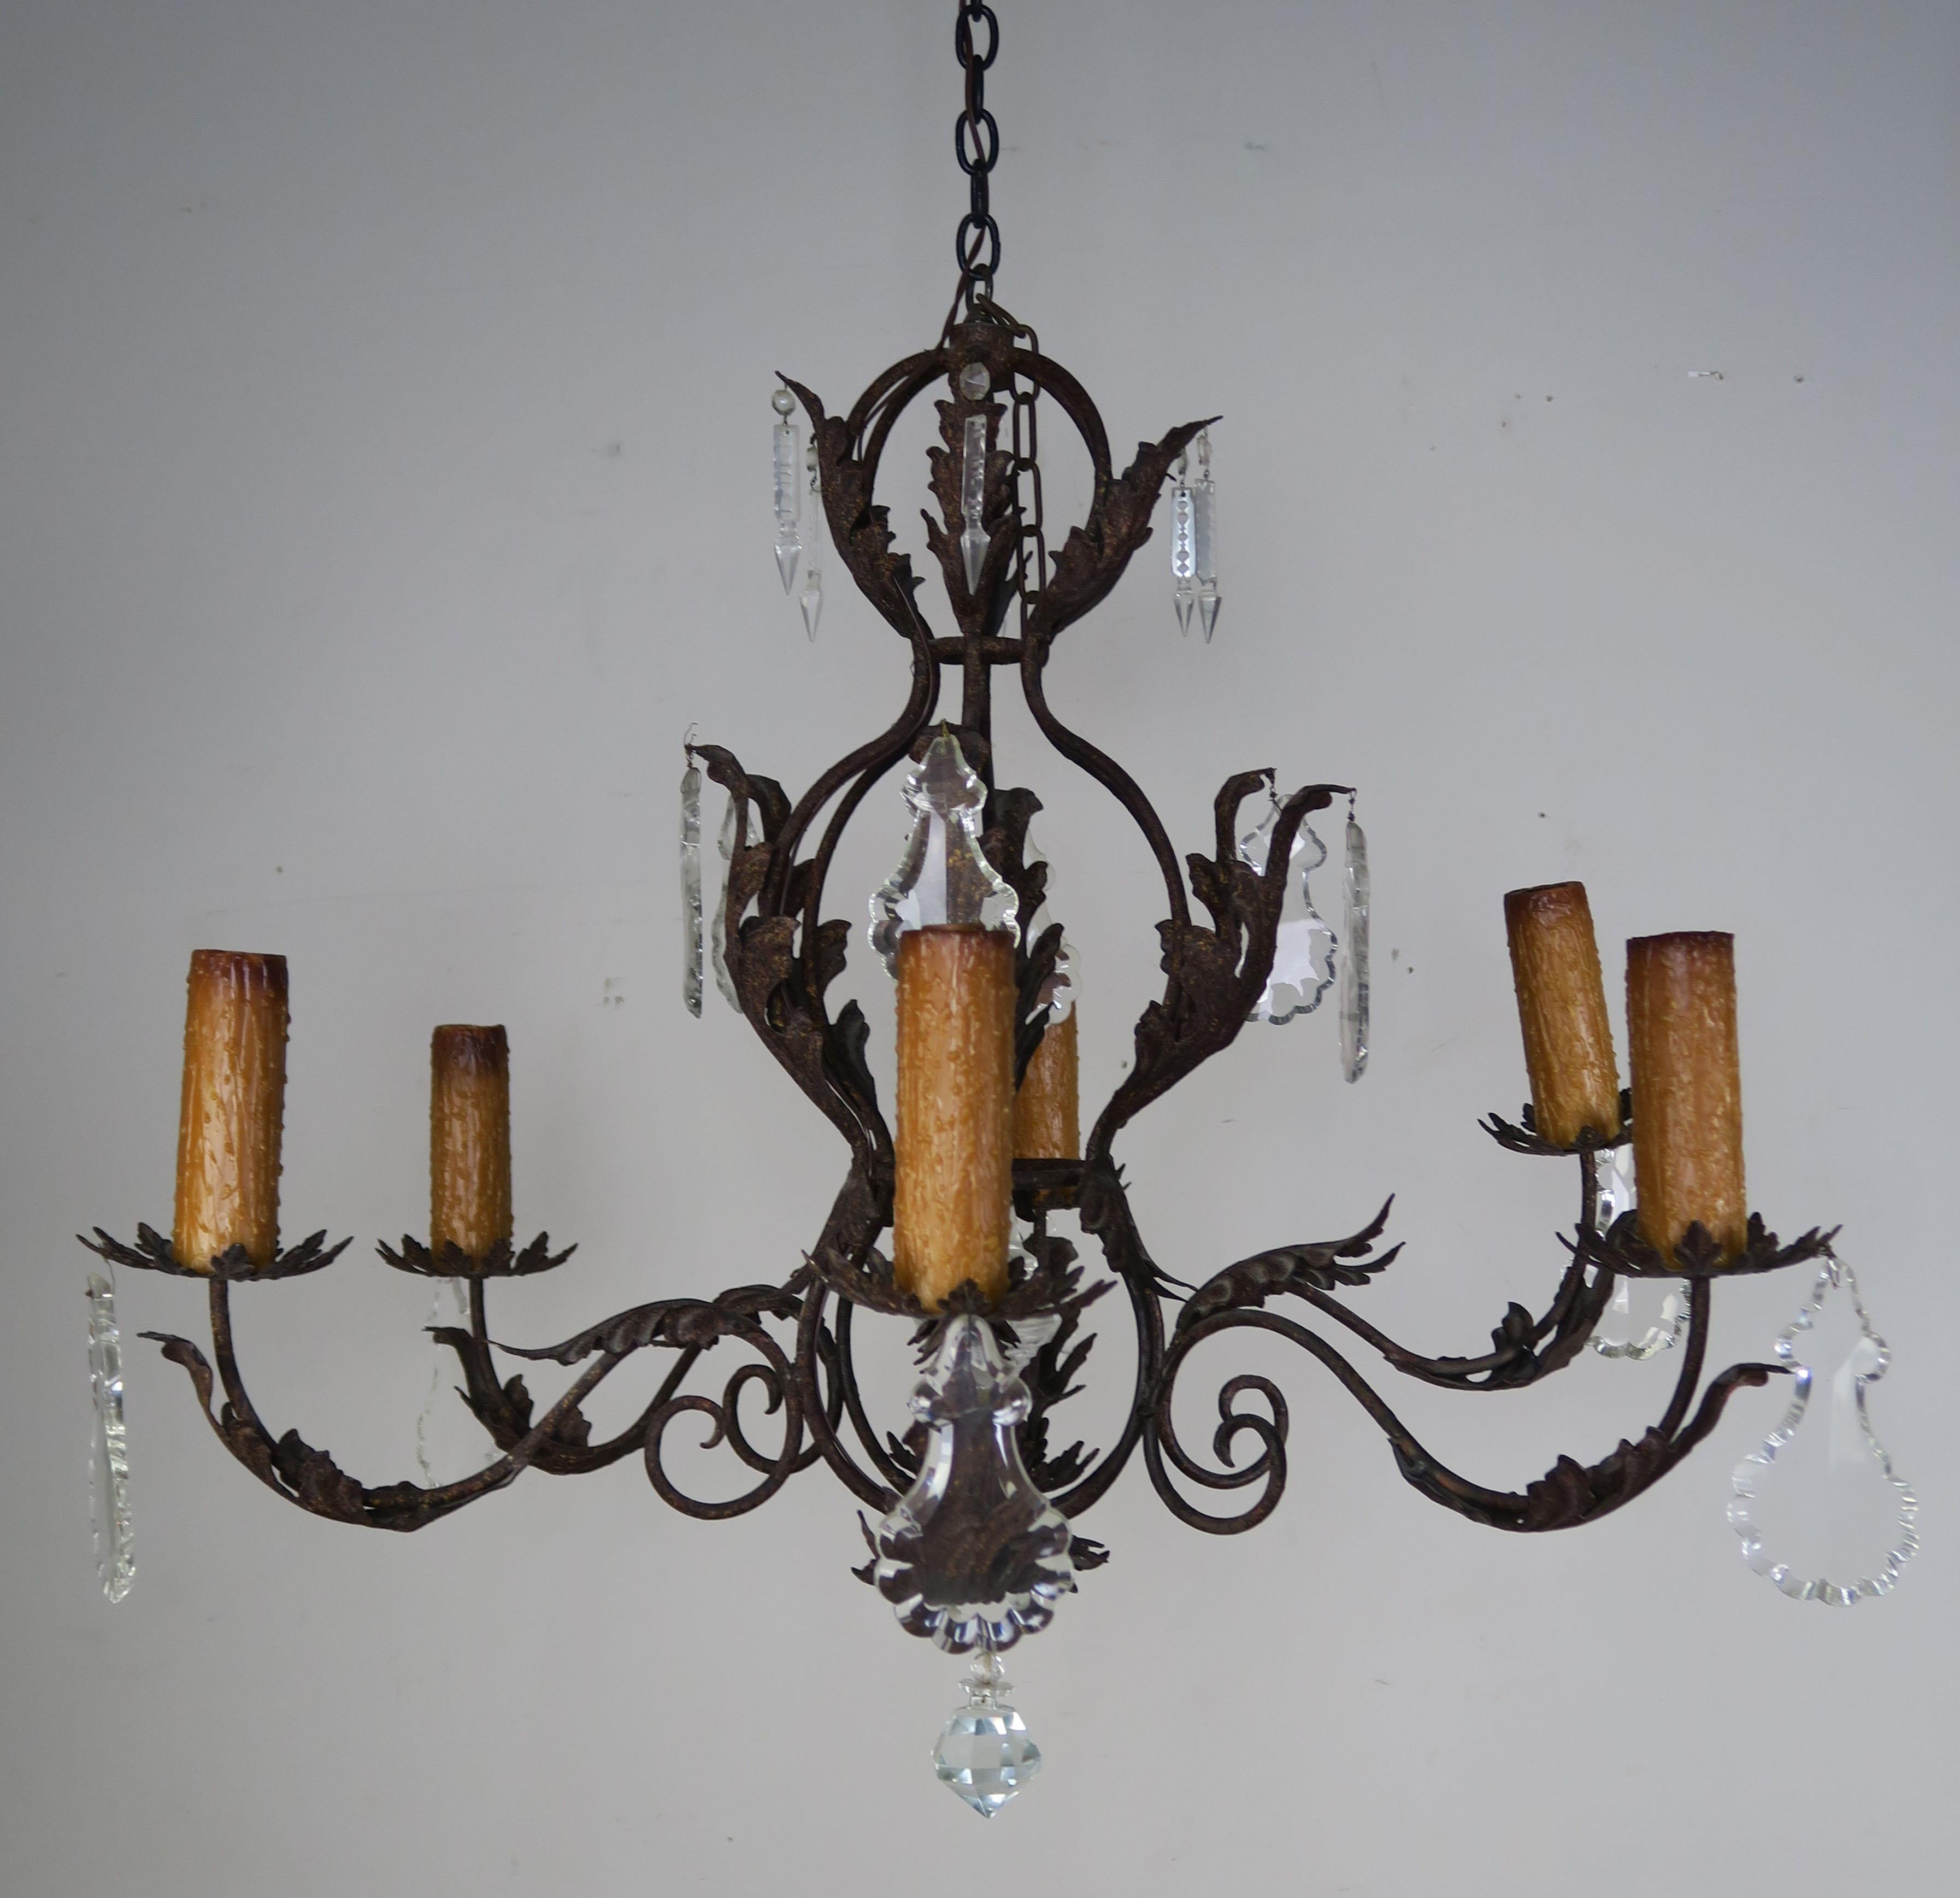 Six light Spanish style wrought iron chandelier with large pendulum and sphere shaped crystal drops.